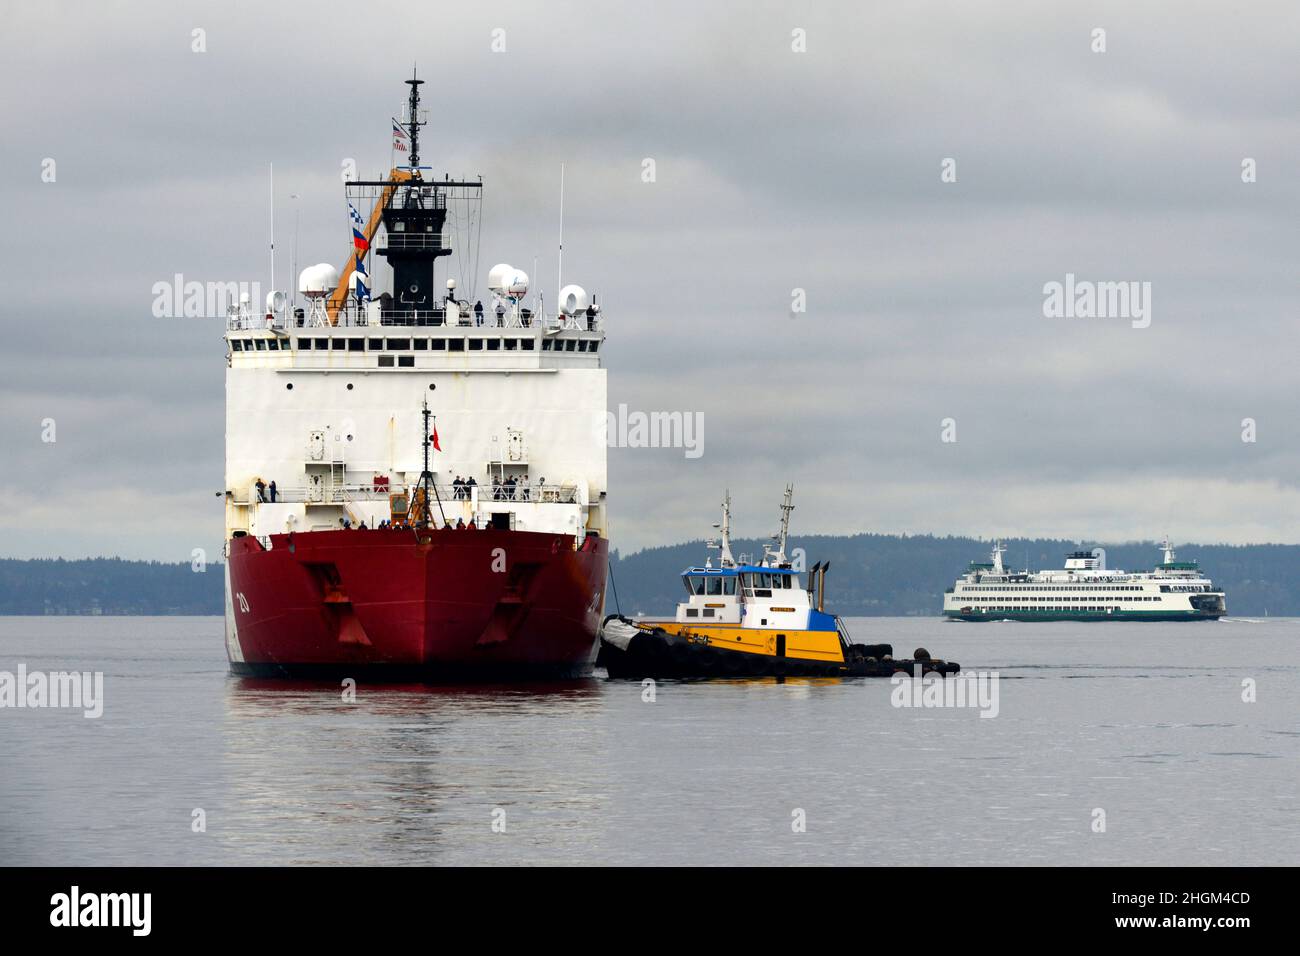 Seattle, United States. 20 November, 2021. A tug boat assists the U.S. Coast Guard Cutter Healy, as it returns to homeport at the Base Seattle pier following a 22,000-mile, 133-day deployment circumnavigating North America, November 20, 2021 in Seattle, Washington. Credit: PO3 Michael Clark/US Coast Guard Photo/Alamy Live News Stock Photo